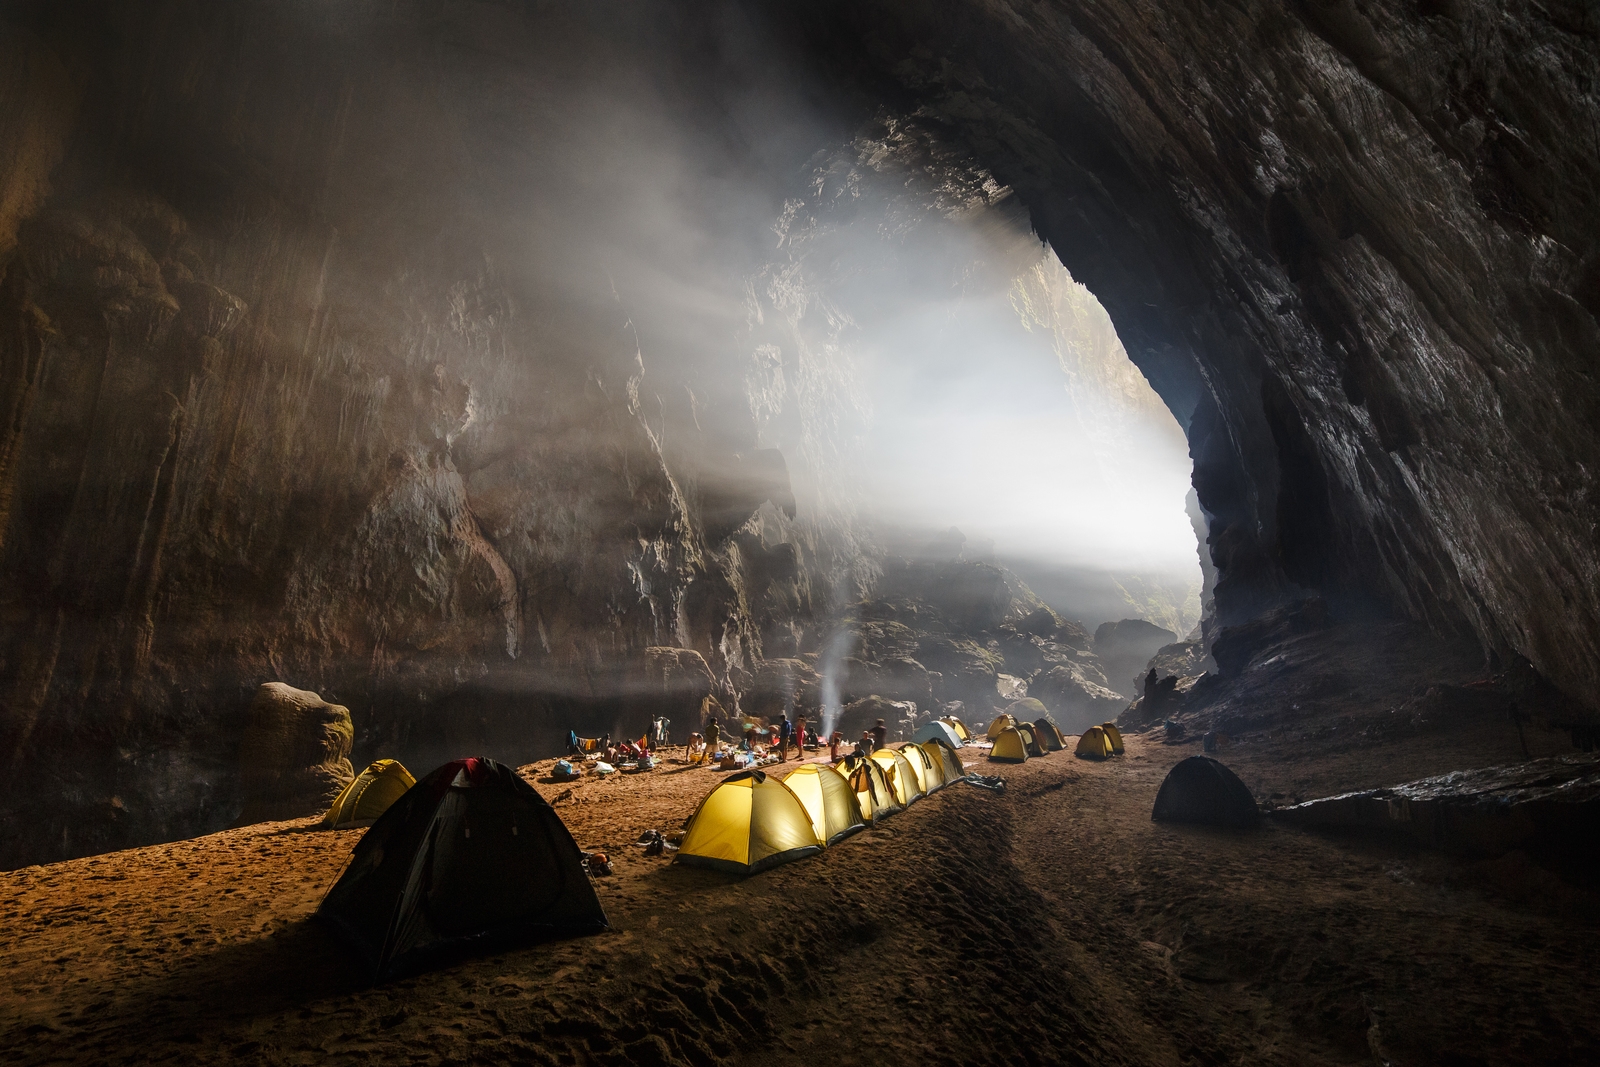 The majestic Kingdom of Caves in Vietnam